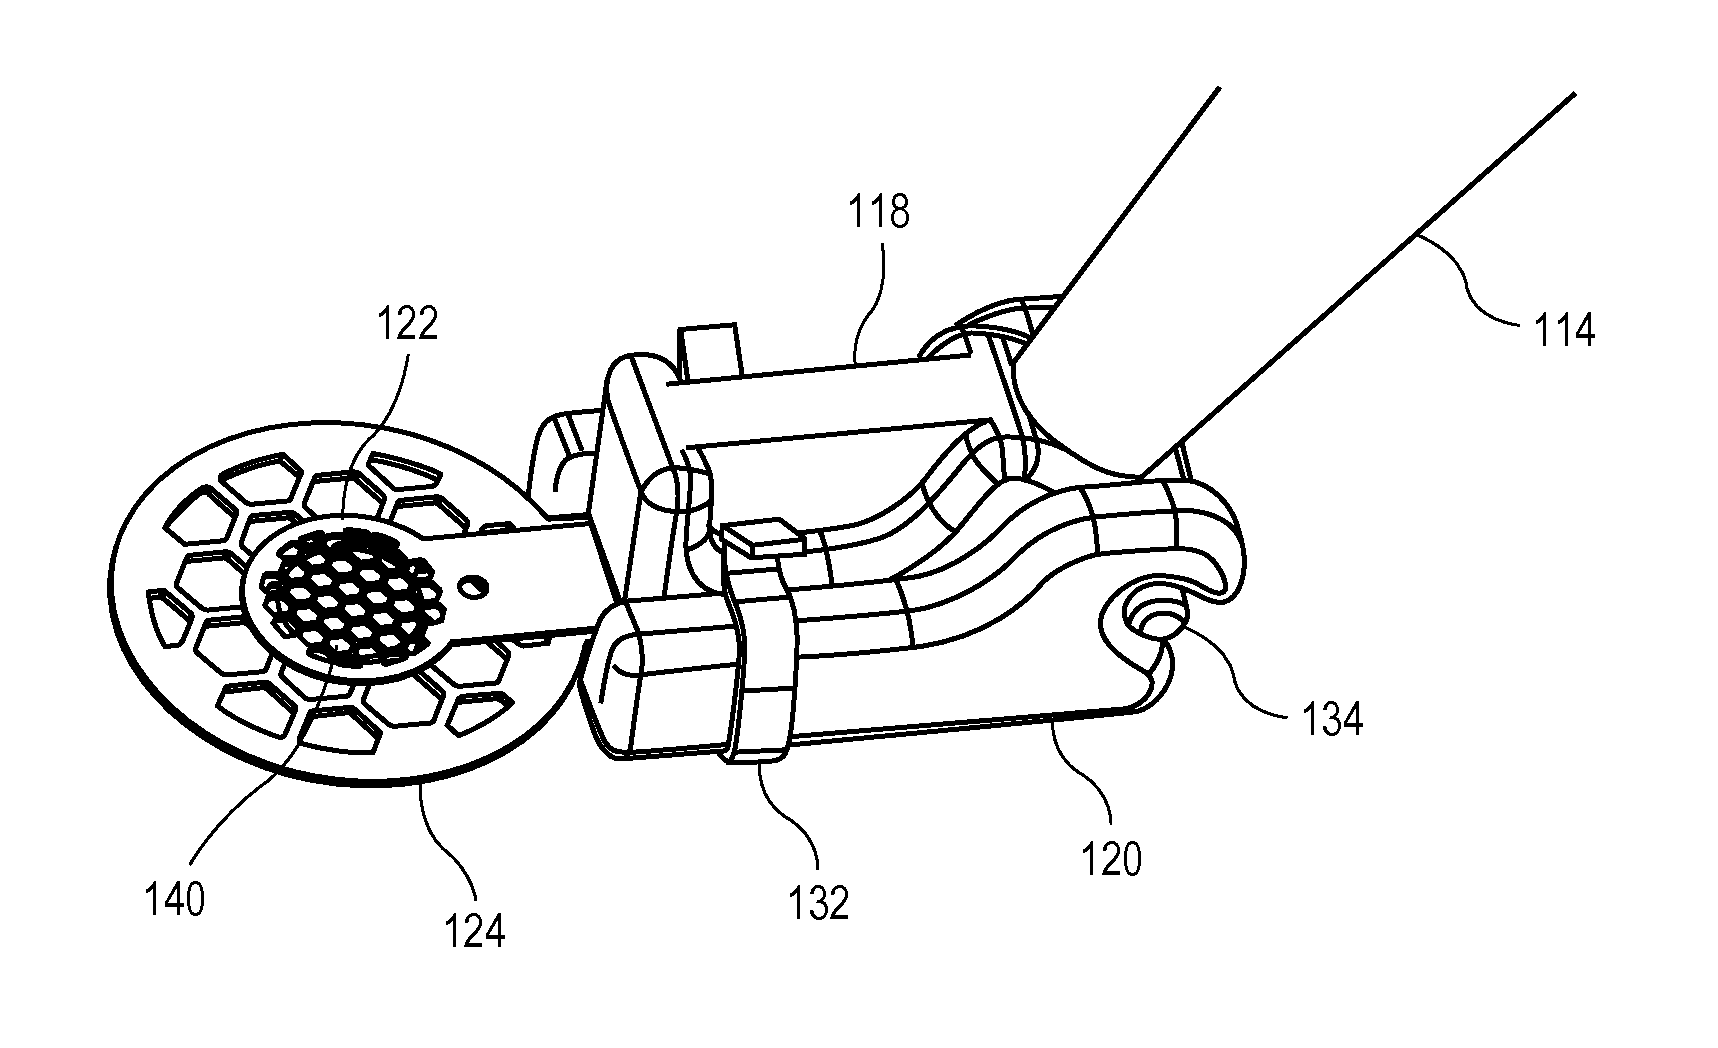 Corneal Implant Storage and Delivery Devices